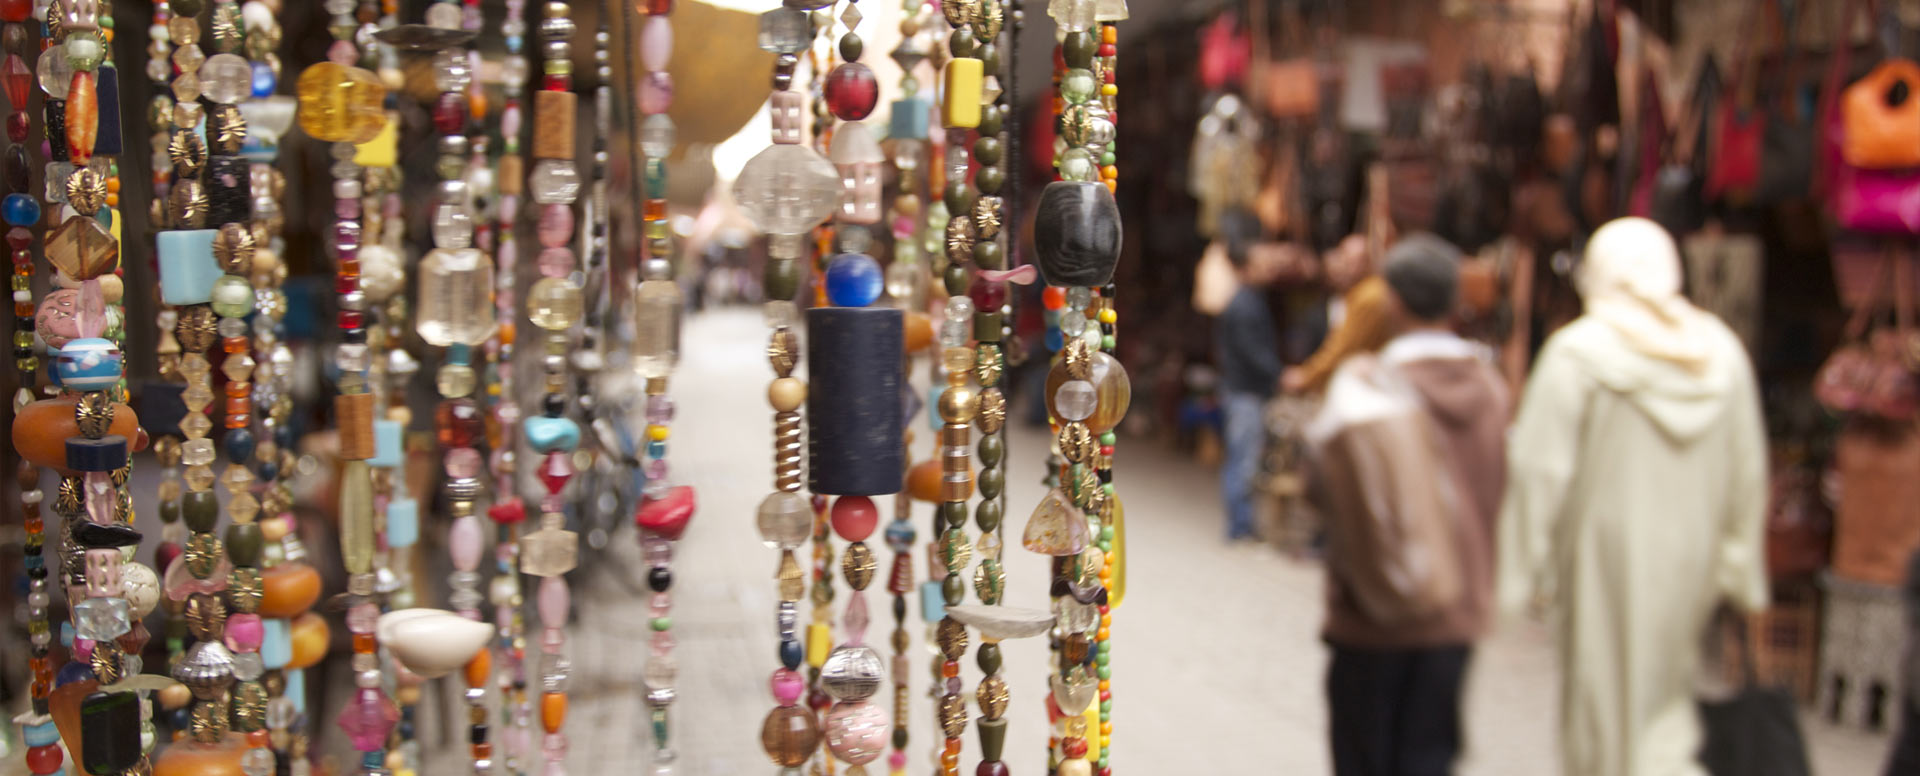 Take a stroll through the Medina and shop in the souks - Marrakech